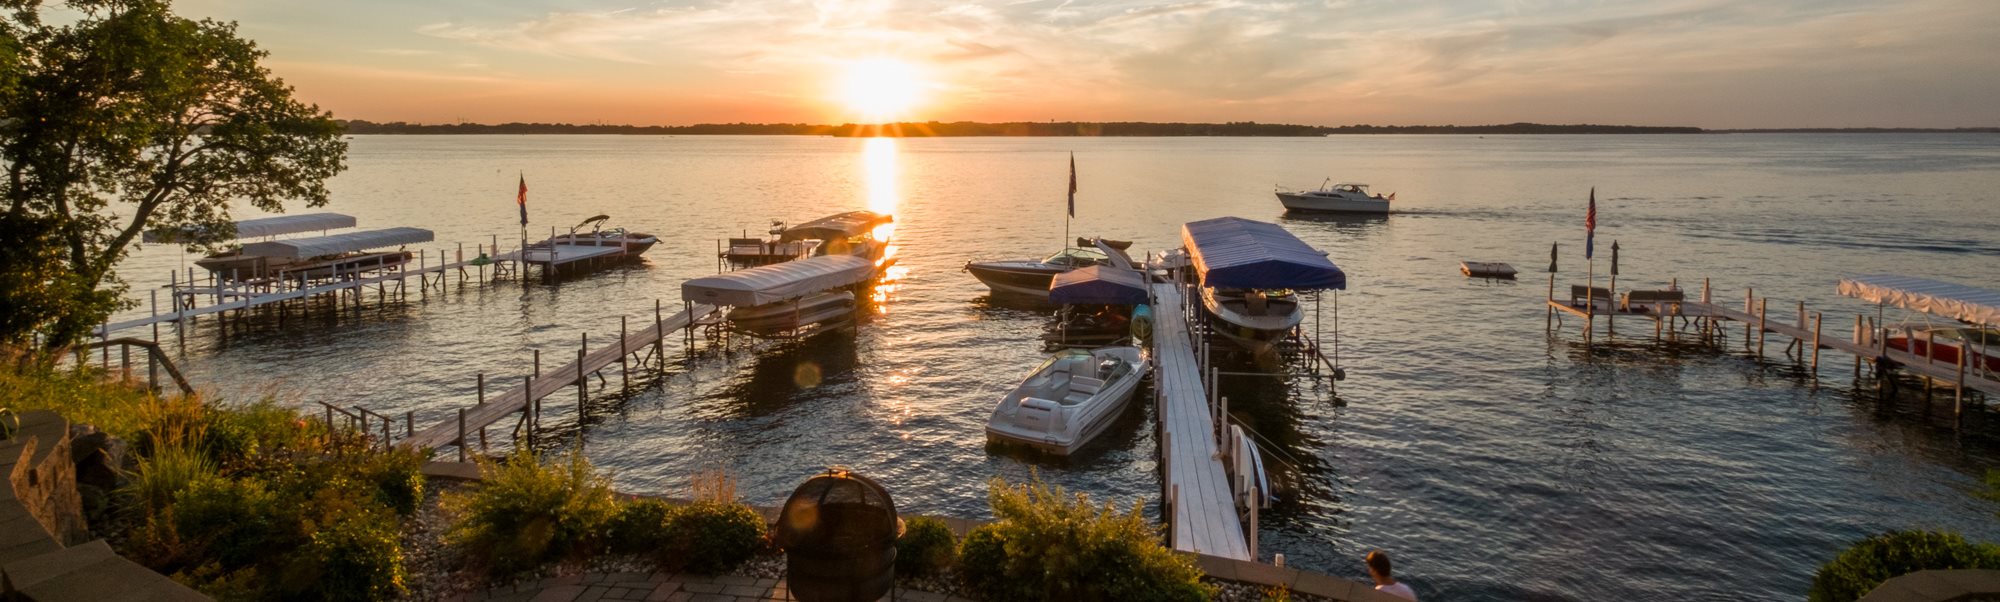 Lakeside view of docks and boats during sunset